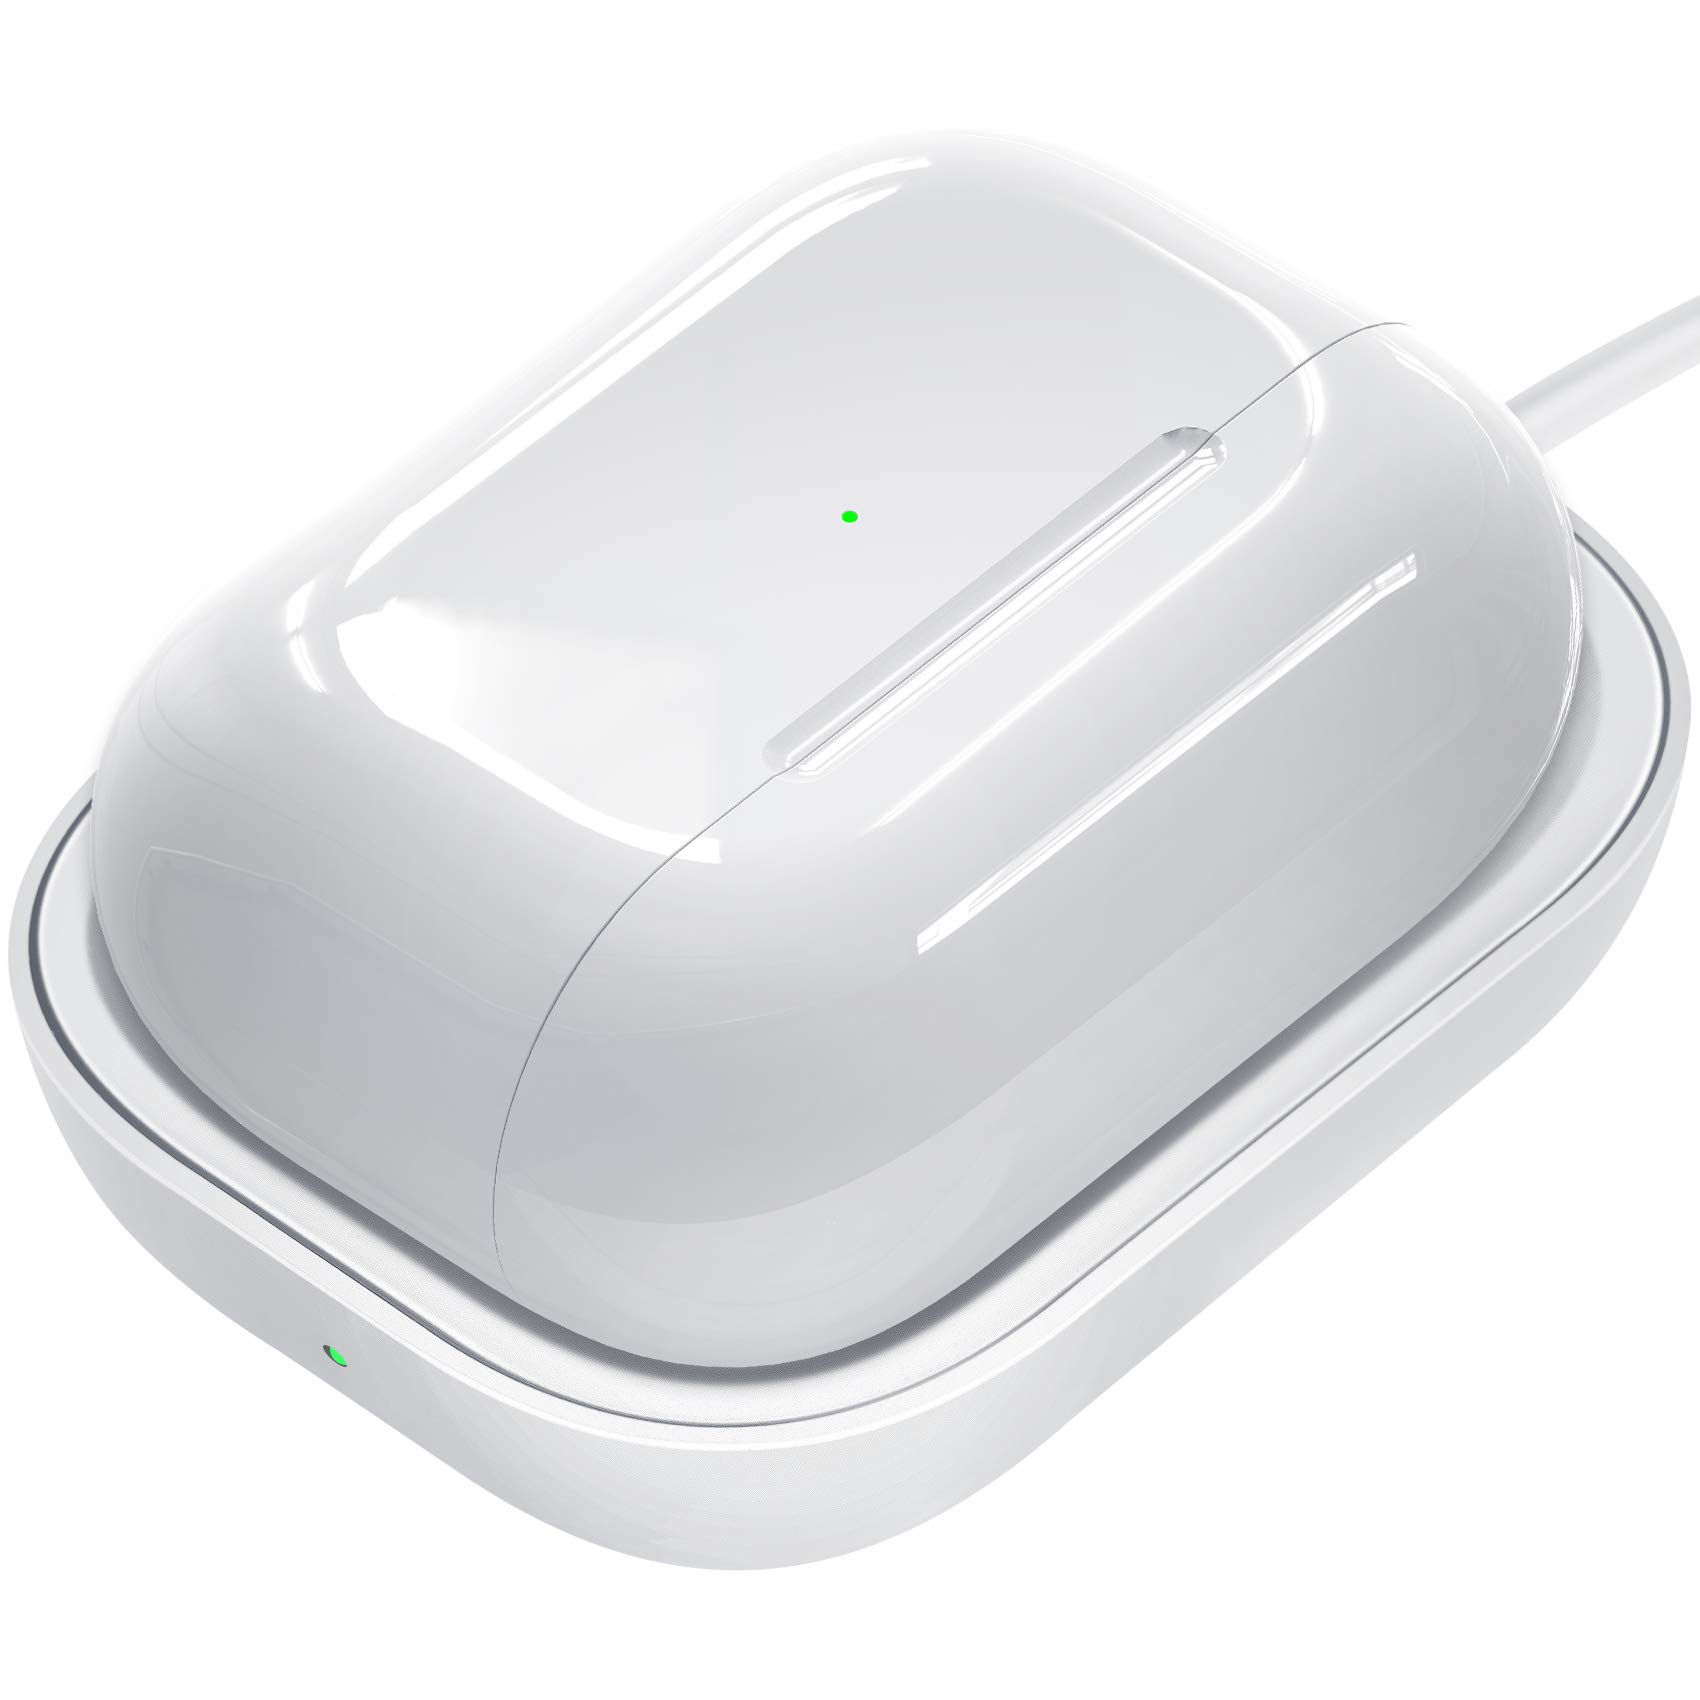 Addressing Heat Concerns: AirPods Heating During Wireless Charging